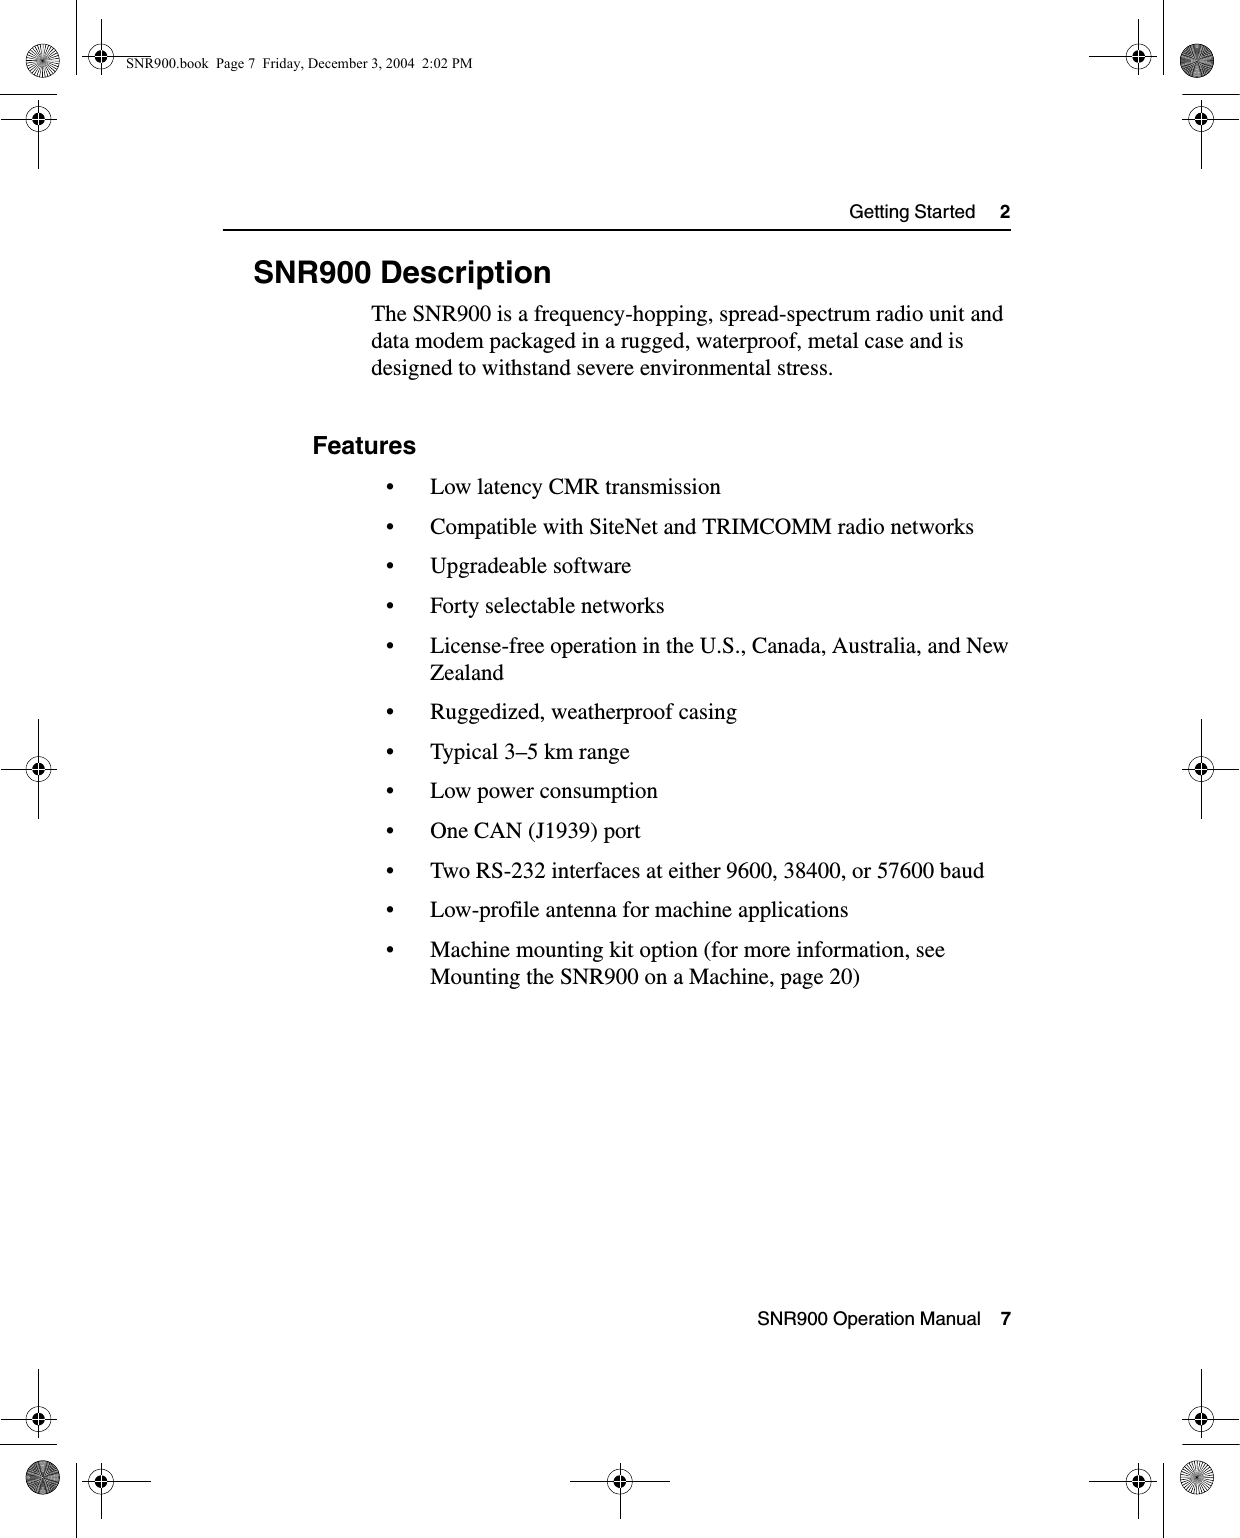  SNR900 Operation Manual    7Getting Started     22.3 SNR900 DescriptionThe SNR900 is a frequency-hopping, spread-spectrum radio unit and data modem packaged in a rugged, waterproof, metal case and is designed to withstand severe environmental stress. 2.3.1 Features• Low latency CMR transmission• Compatible with SiteNet and TRIMCOMM radio networks• Upgradeable software• Forty selectable networks• License-free operation in the U.S., Canada, Australia, and New Zealand• Ruggedized, weatherproof casing• Typical 3–5 km range• Low power consumption• One CAN (J1939) port• Two RS-232 interfaces at either 9600, 38400, or 57600 baud• Low-profile antenna for machine applications• Machine mounting kit option (for more information, see Mounting the SNR900 on a Machine, page 20) SNR900.book  Page 7  Friday, December 3, 2004  2:02 PM